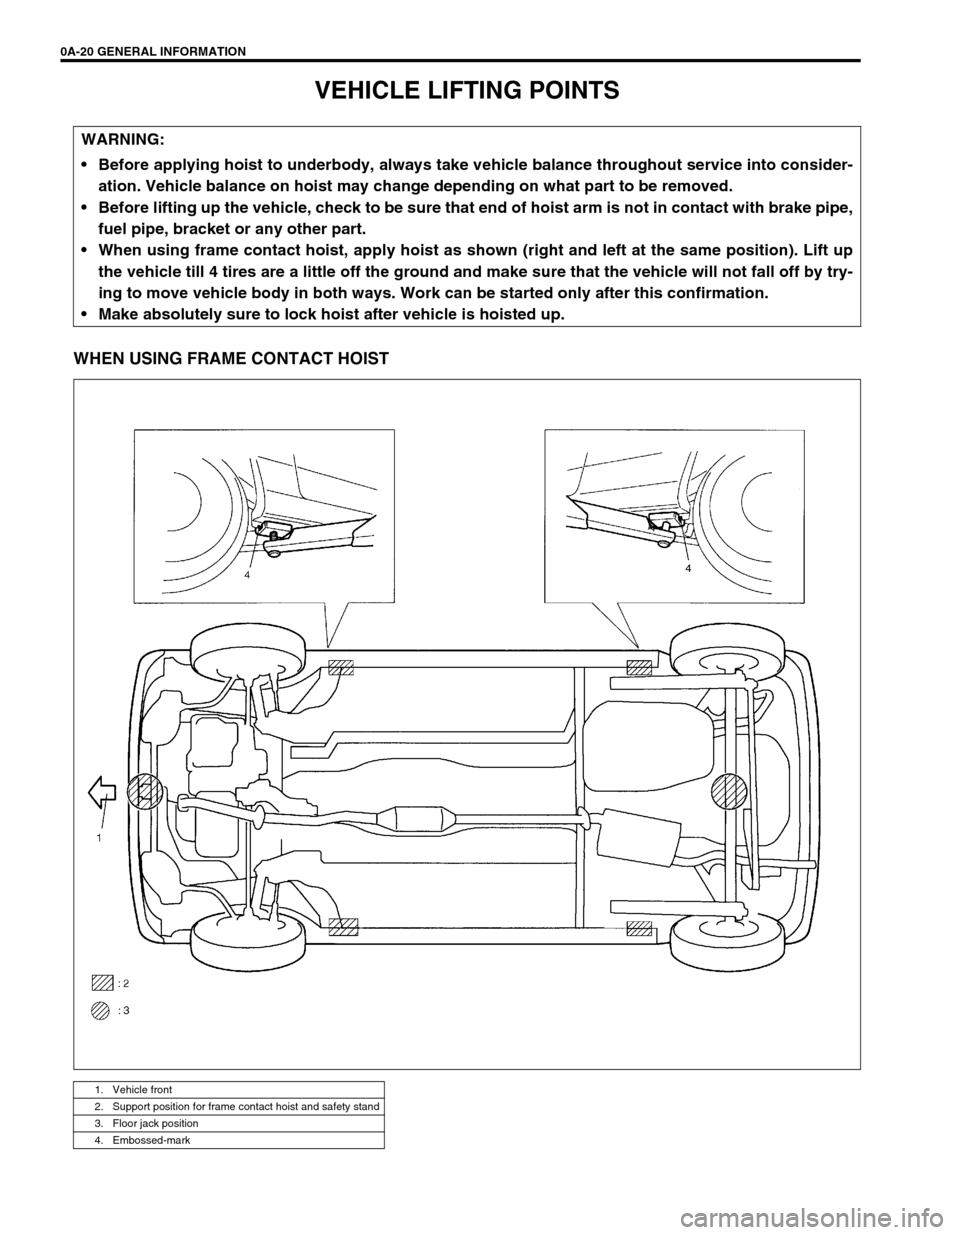 SUZUKI SWIFT 2000 1.G RG413 Service Workshop Manual 0A-20 GENERAL INFORMATION
VEHICLE LIFTING POINTS
WHEN USING FRAME CONTACT HOIST
WARNING:
 Before applying hoist to underbody, always take vehicle balance throughout service into consider-
ation. Vehi